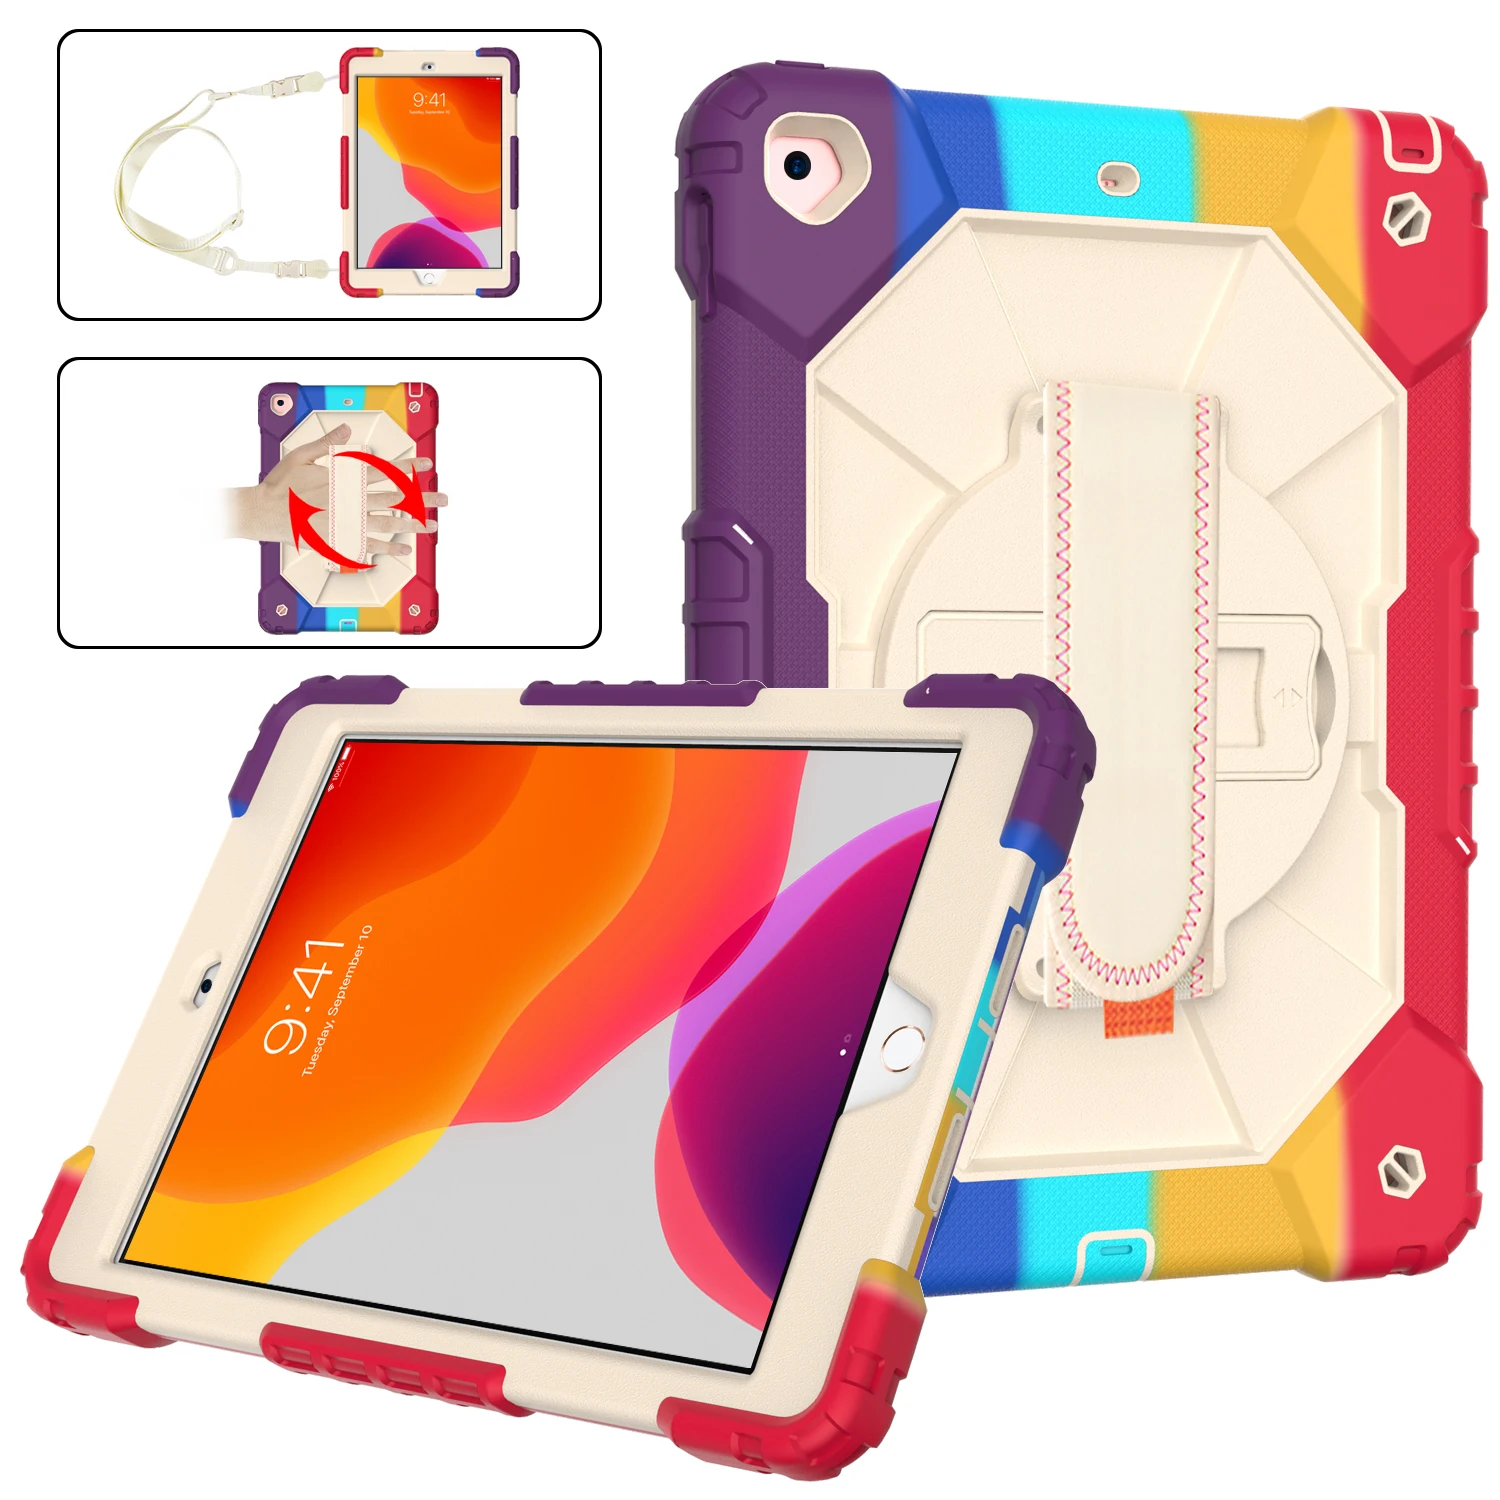 

Rugged Kids Case For iPad 10.2 Inch 7th/8th Generation 2019/2020 With Pencil Holder Hand Shoulder Strap P Shockproof Cover